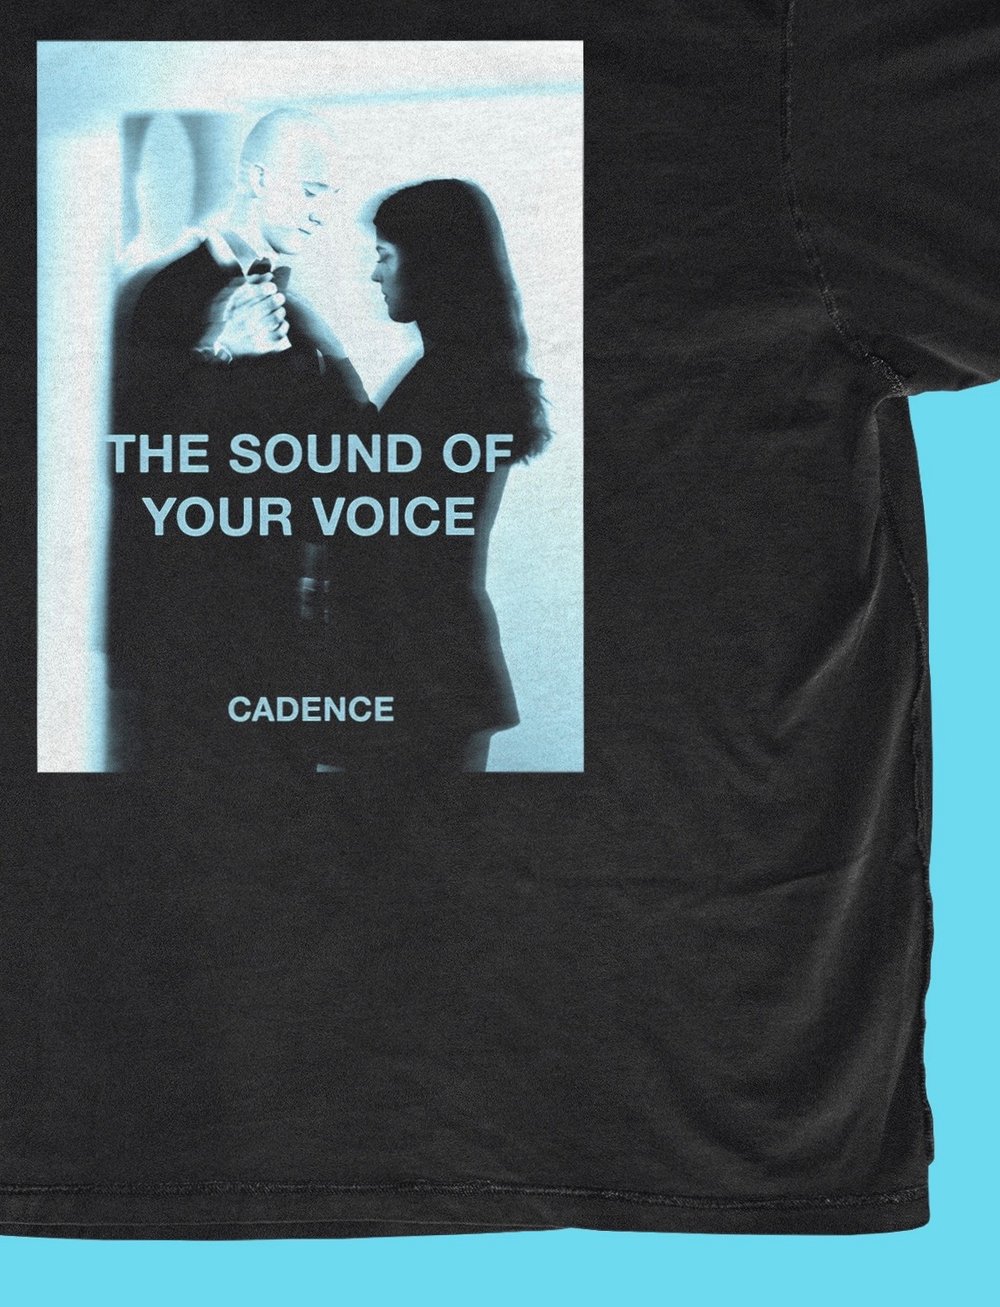 "THE SOUND OF YOUR VOICE"